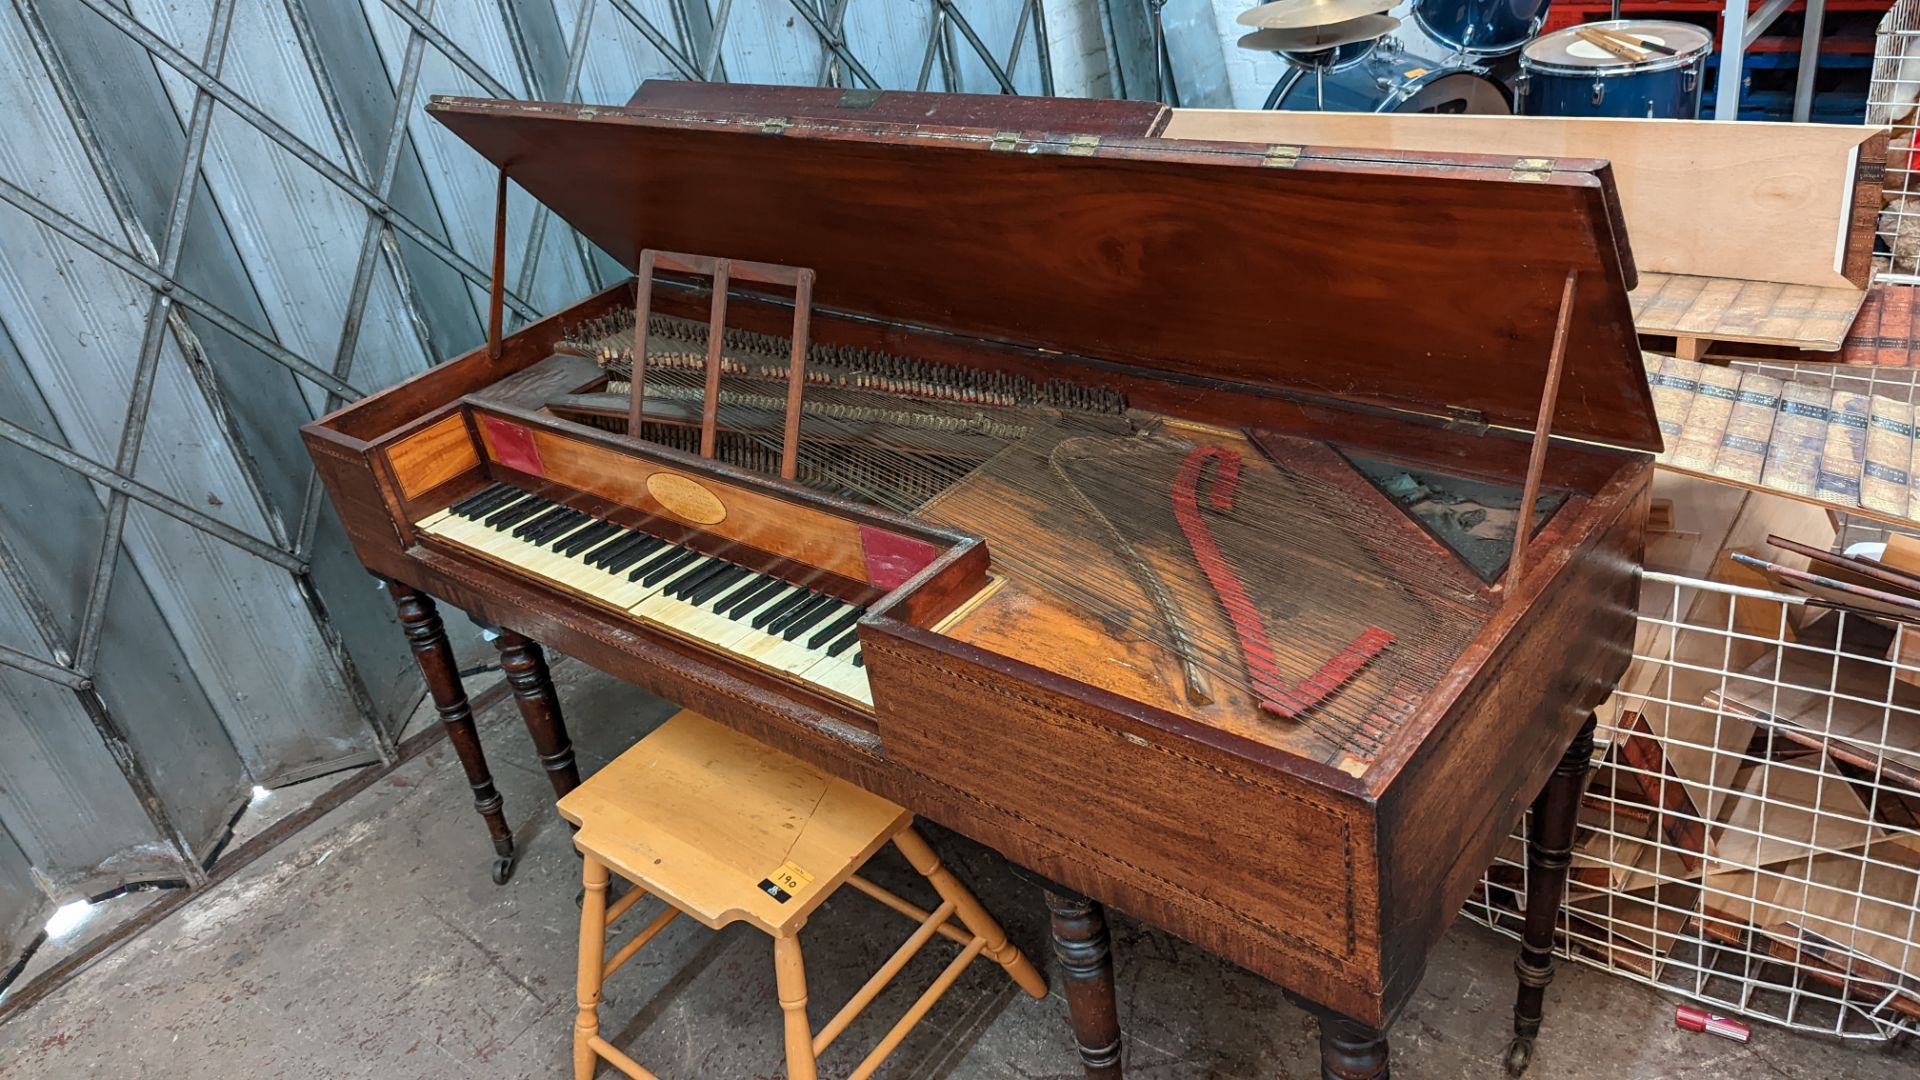 Piano. Label reads: R Jones & Co, upright grand & square, piano forte makers, to his Royal Highness